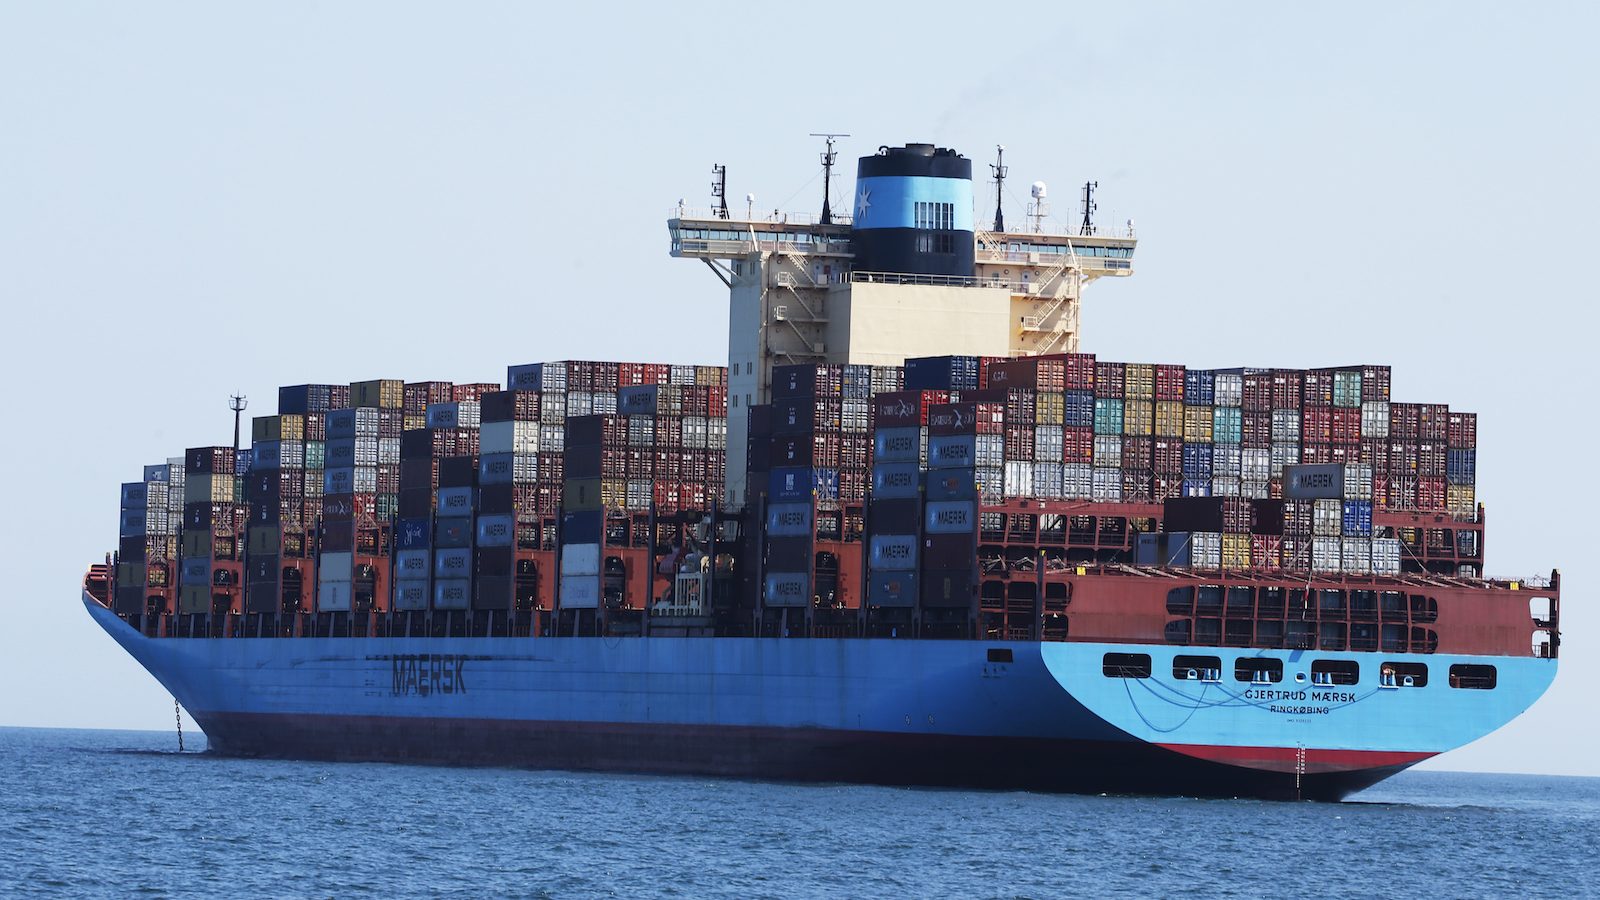 A photo of the container ship Gjertrud Maersk, anchored off the coast of Virginia Beach on June 29, 2020. The large, blue vessel is topped with hundreds of colorful shipping containers